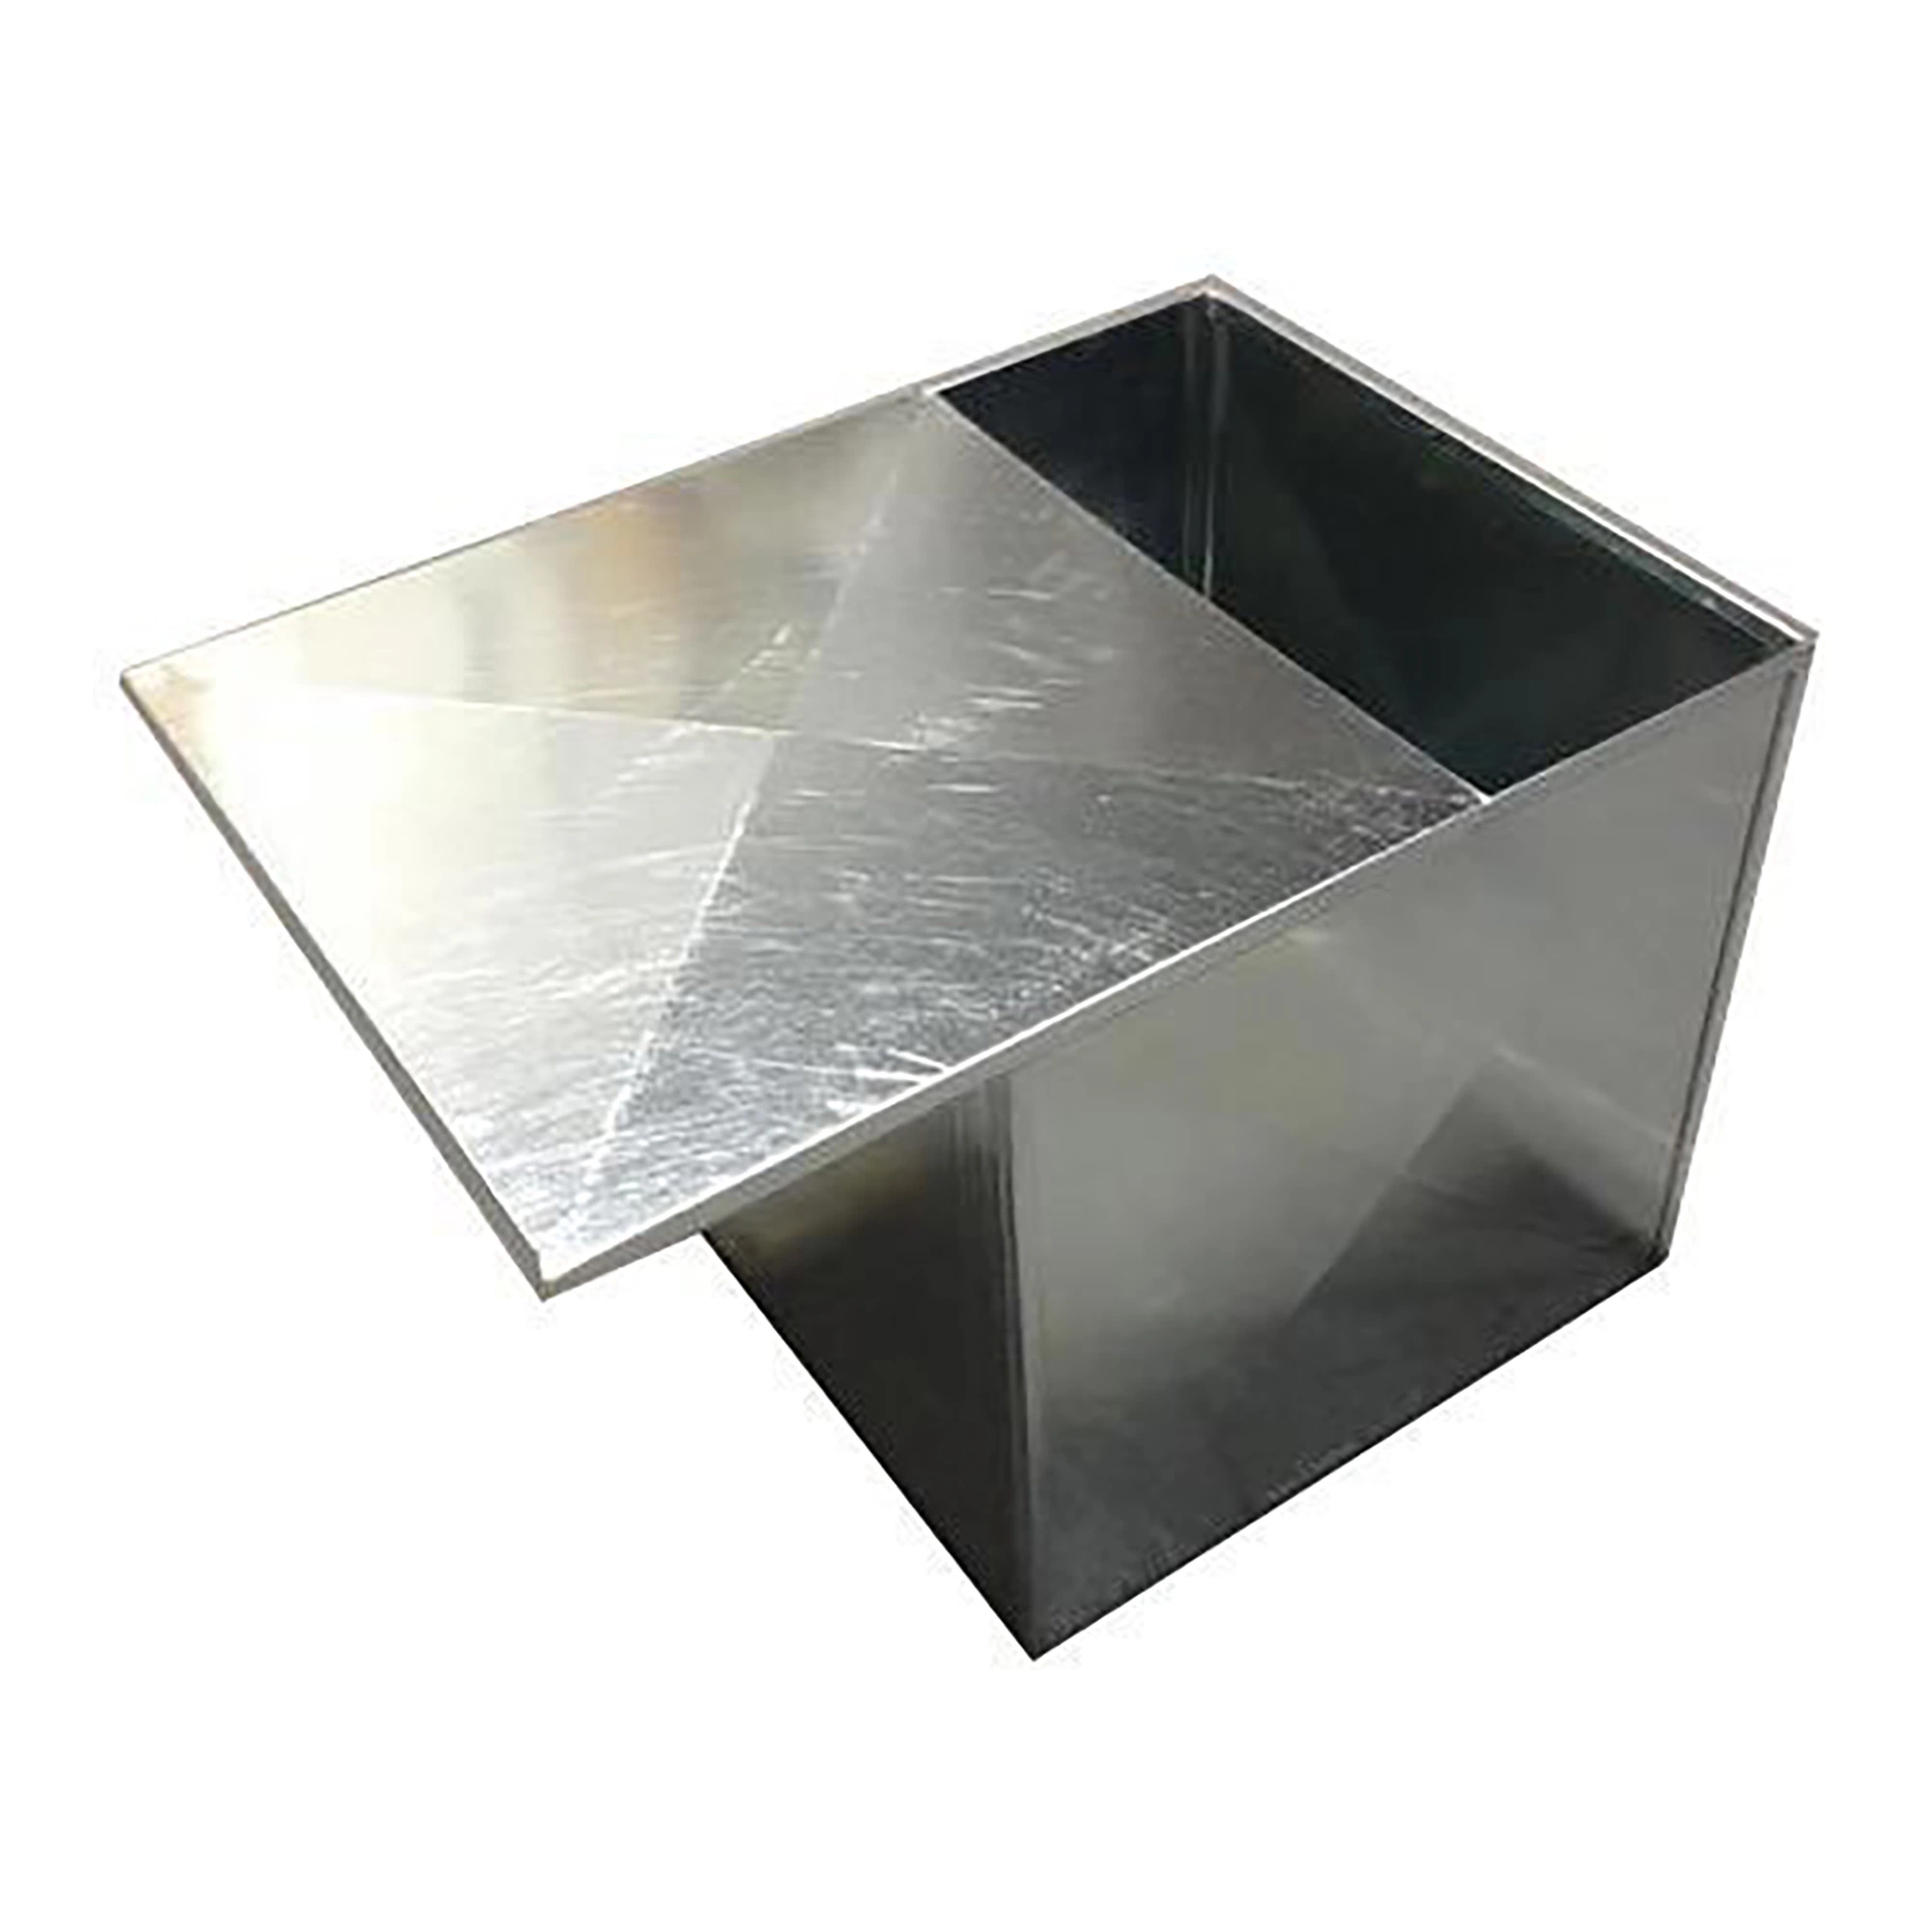 Stainless Steel Galvanized Metal Equipment Device Electrical Enclosure Cabinet Shell Housing